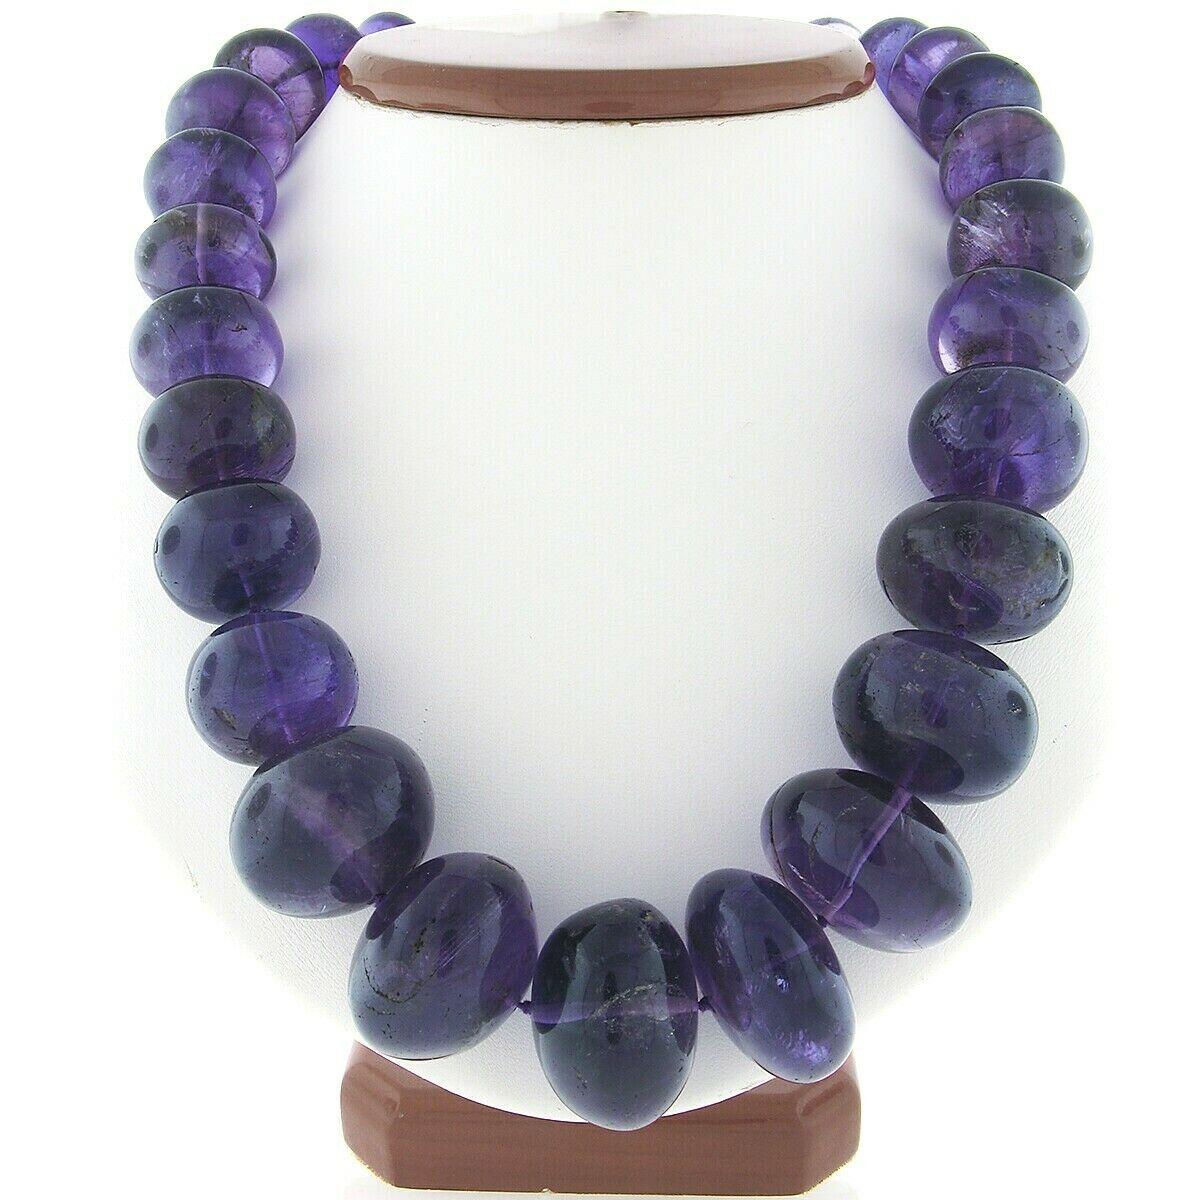 This magnificent vintage strand necklace was neatly strung with 32 natural genuine amethyst in which graduate from 15.6mm to 26mm in diameter throughout. Each of these rondelle shaped stones have a nice polished finish and display an absolutely